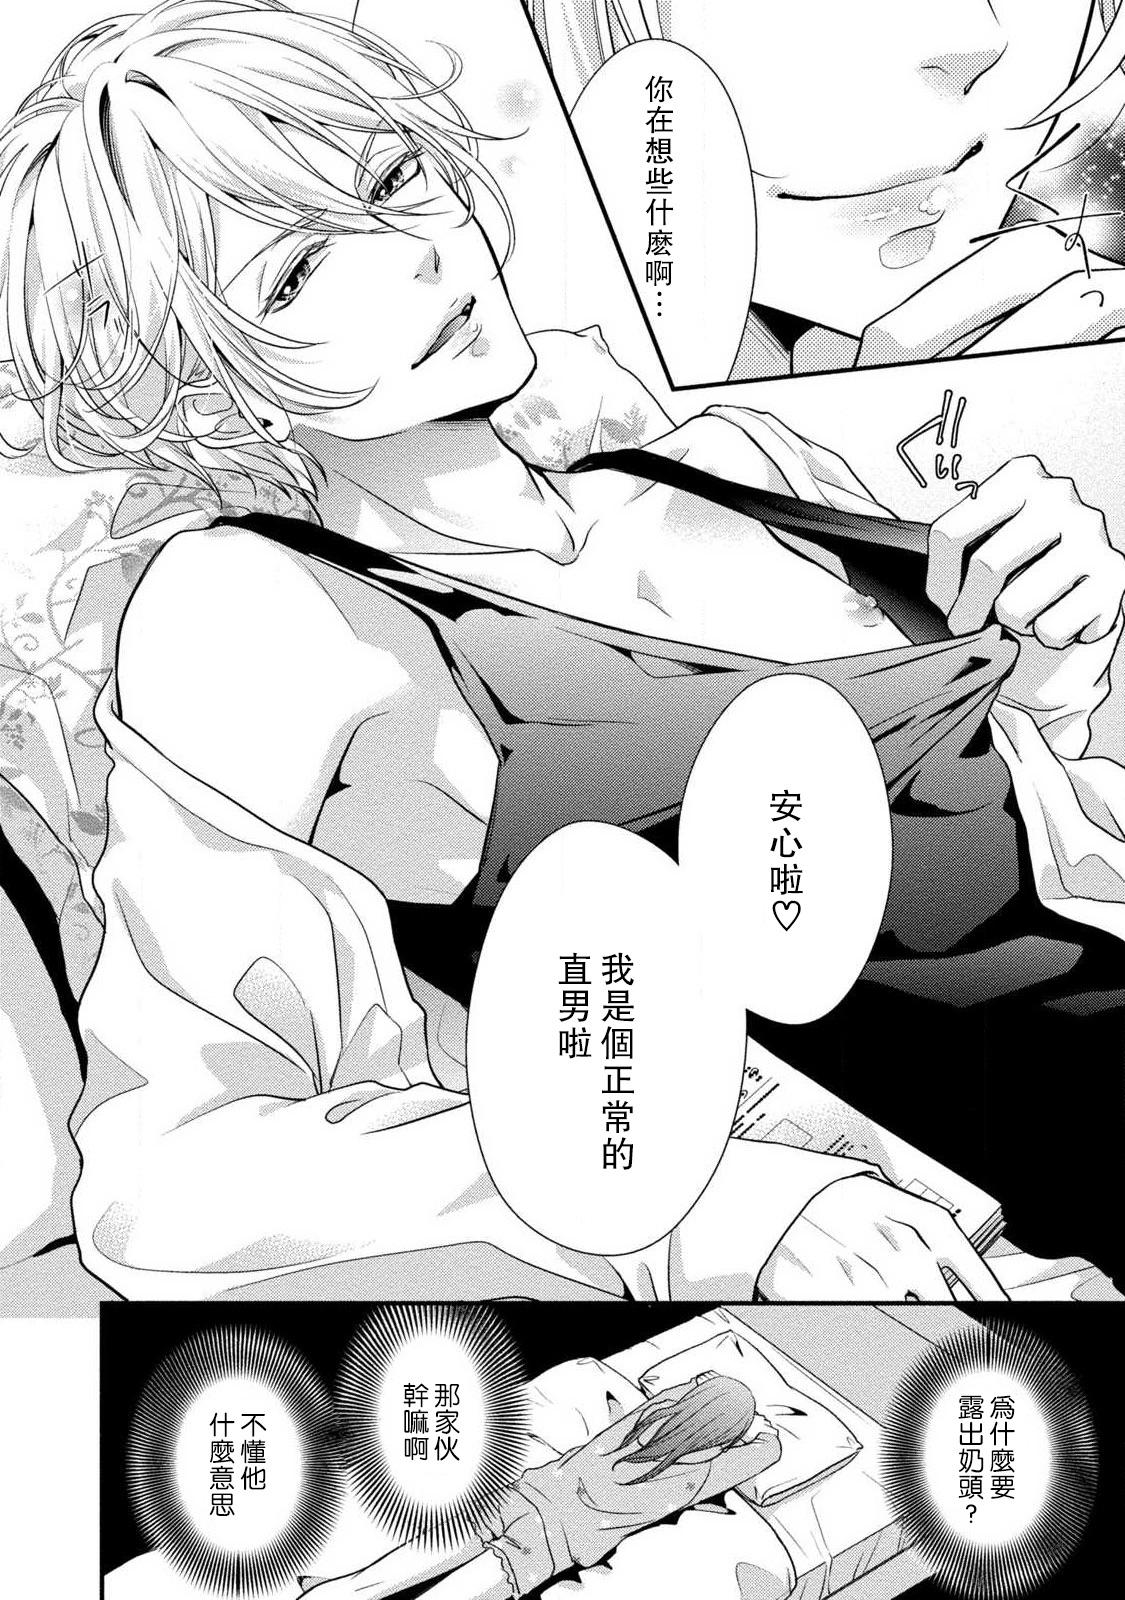 Big Ass If my brother's friend was a male of exposure | 哥哥的朋友是露出系男子 Hottie - Page 10